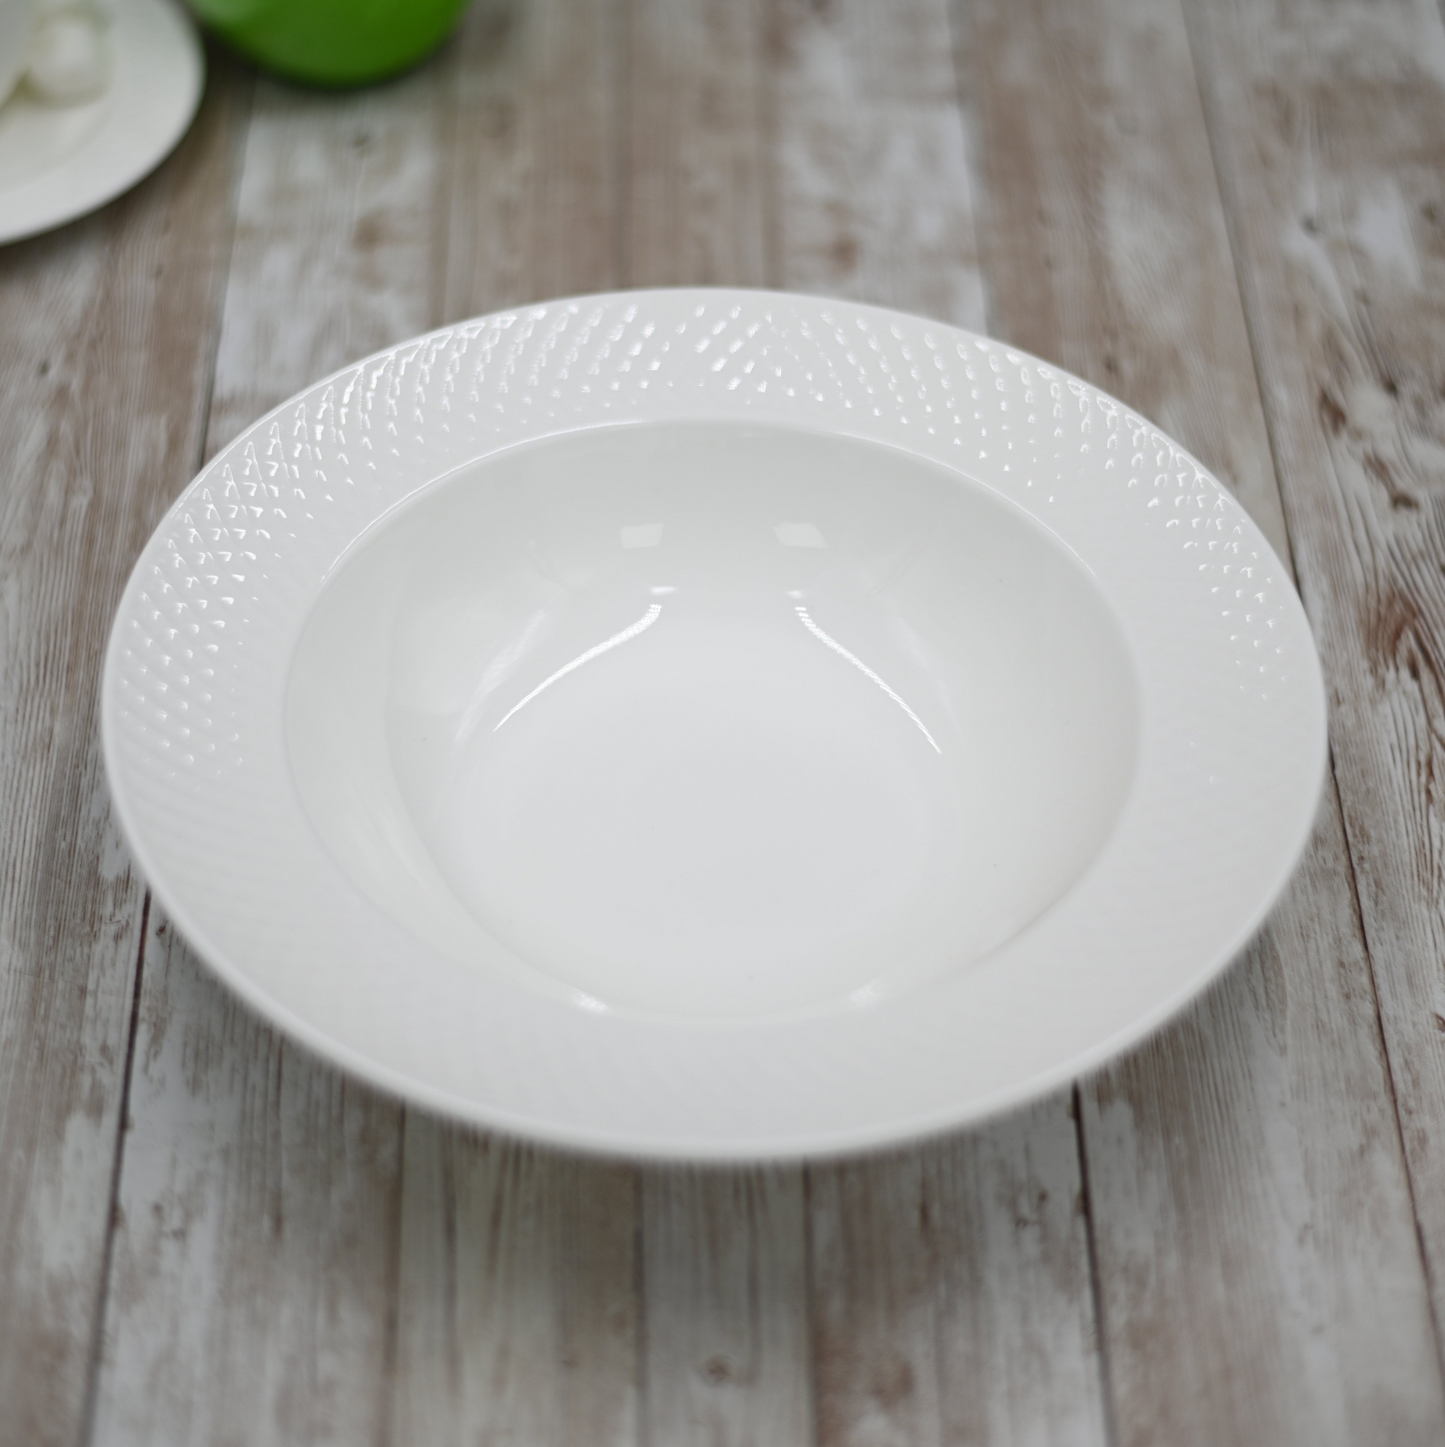 Wilmax Fine Julia Porcelain Deep Plate Dinnerware Set For 6 Including 10" Charger Plate WL-555027